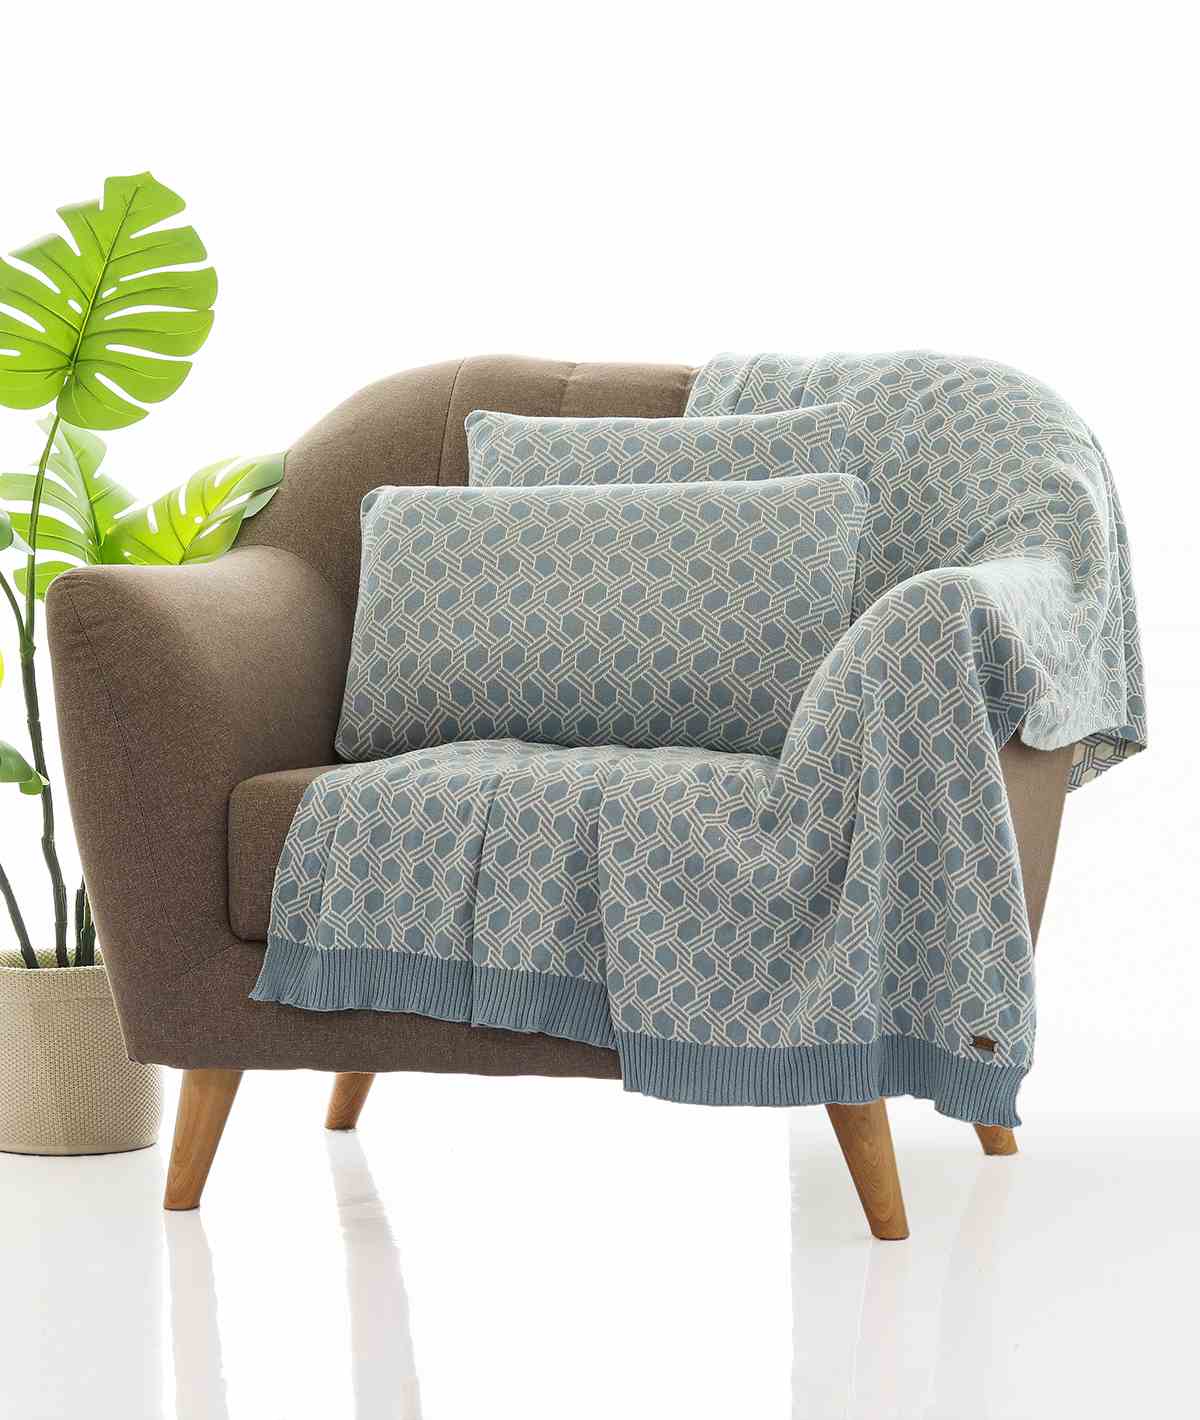 throw and cushion cover set